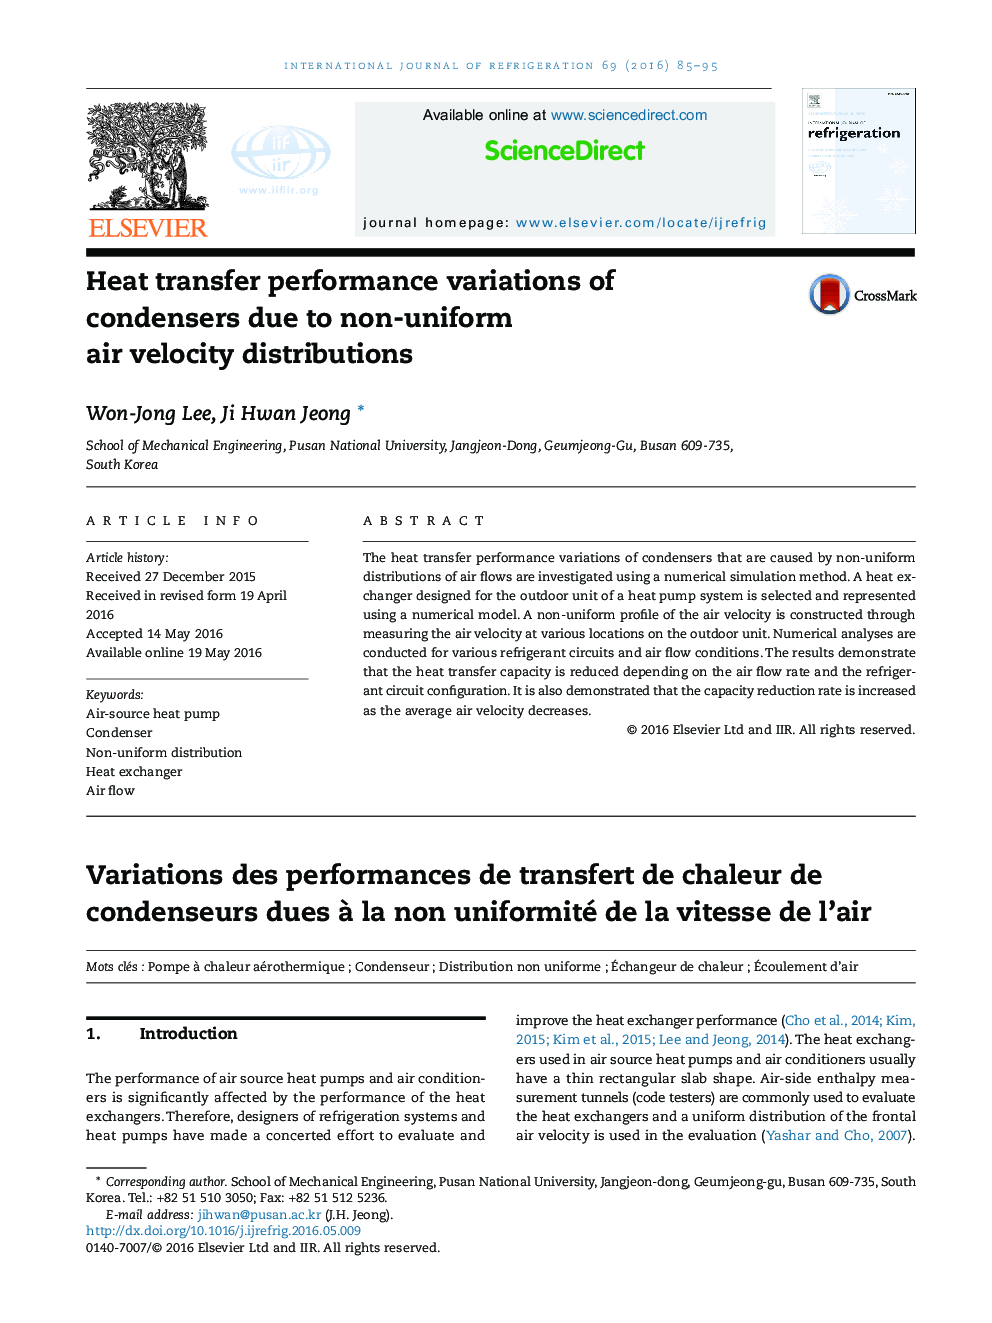 Heat transfer performance variations of condensers due to non-uniform air velocity distributions